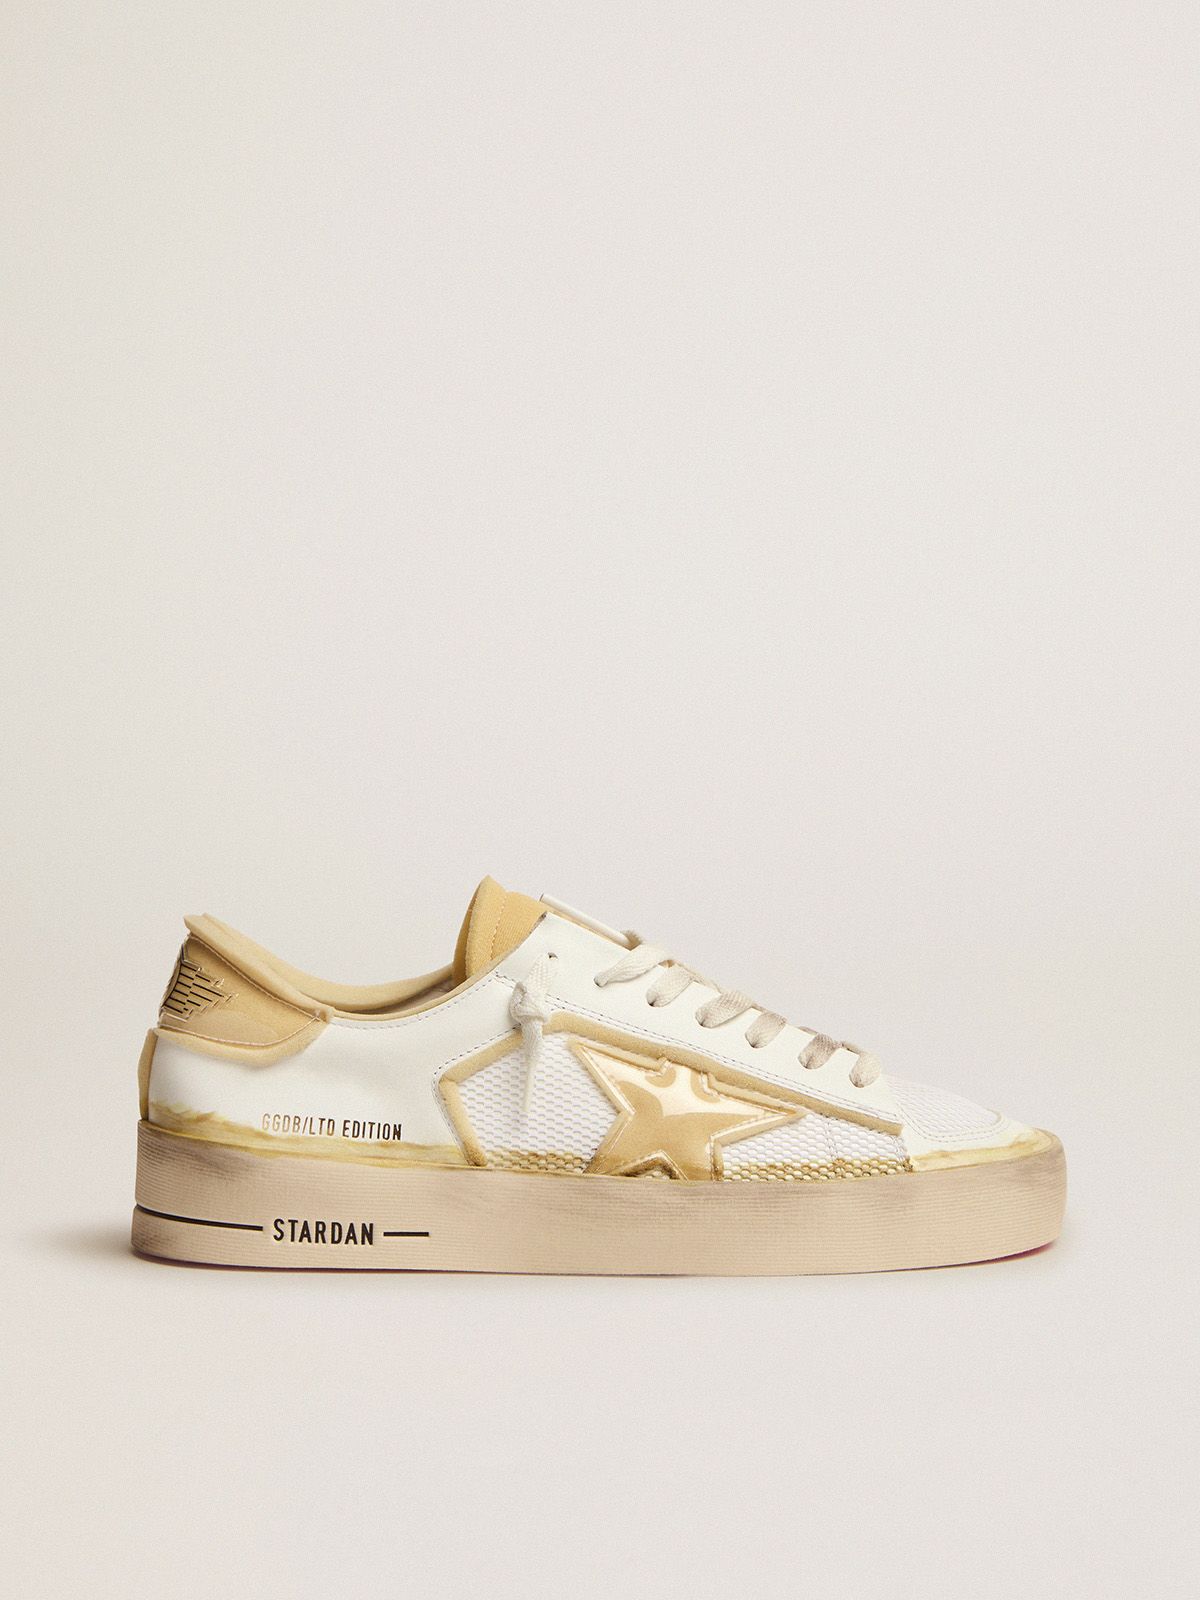 golden goose Stardan sneakers leather white in PVC inserts foam LAB with and